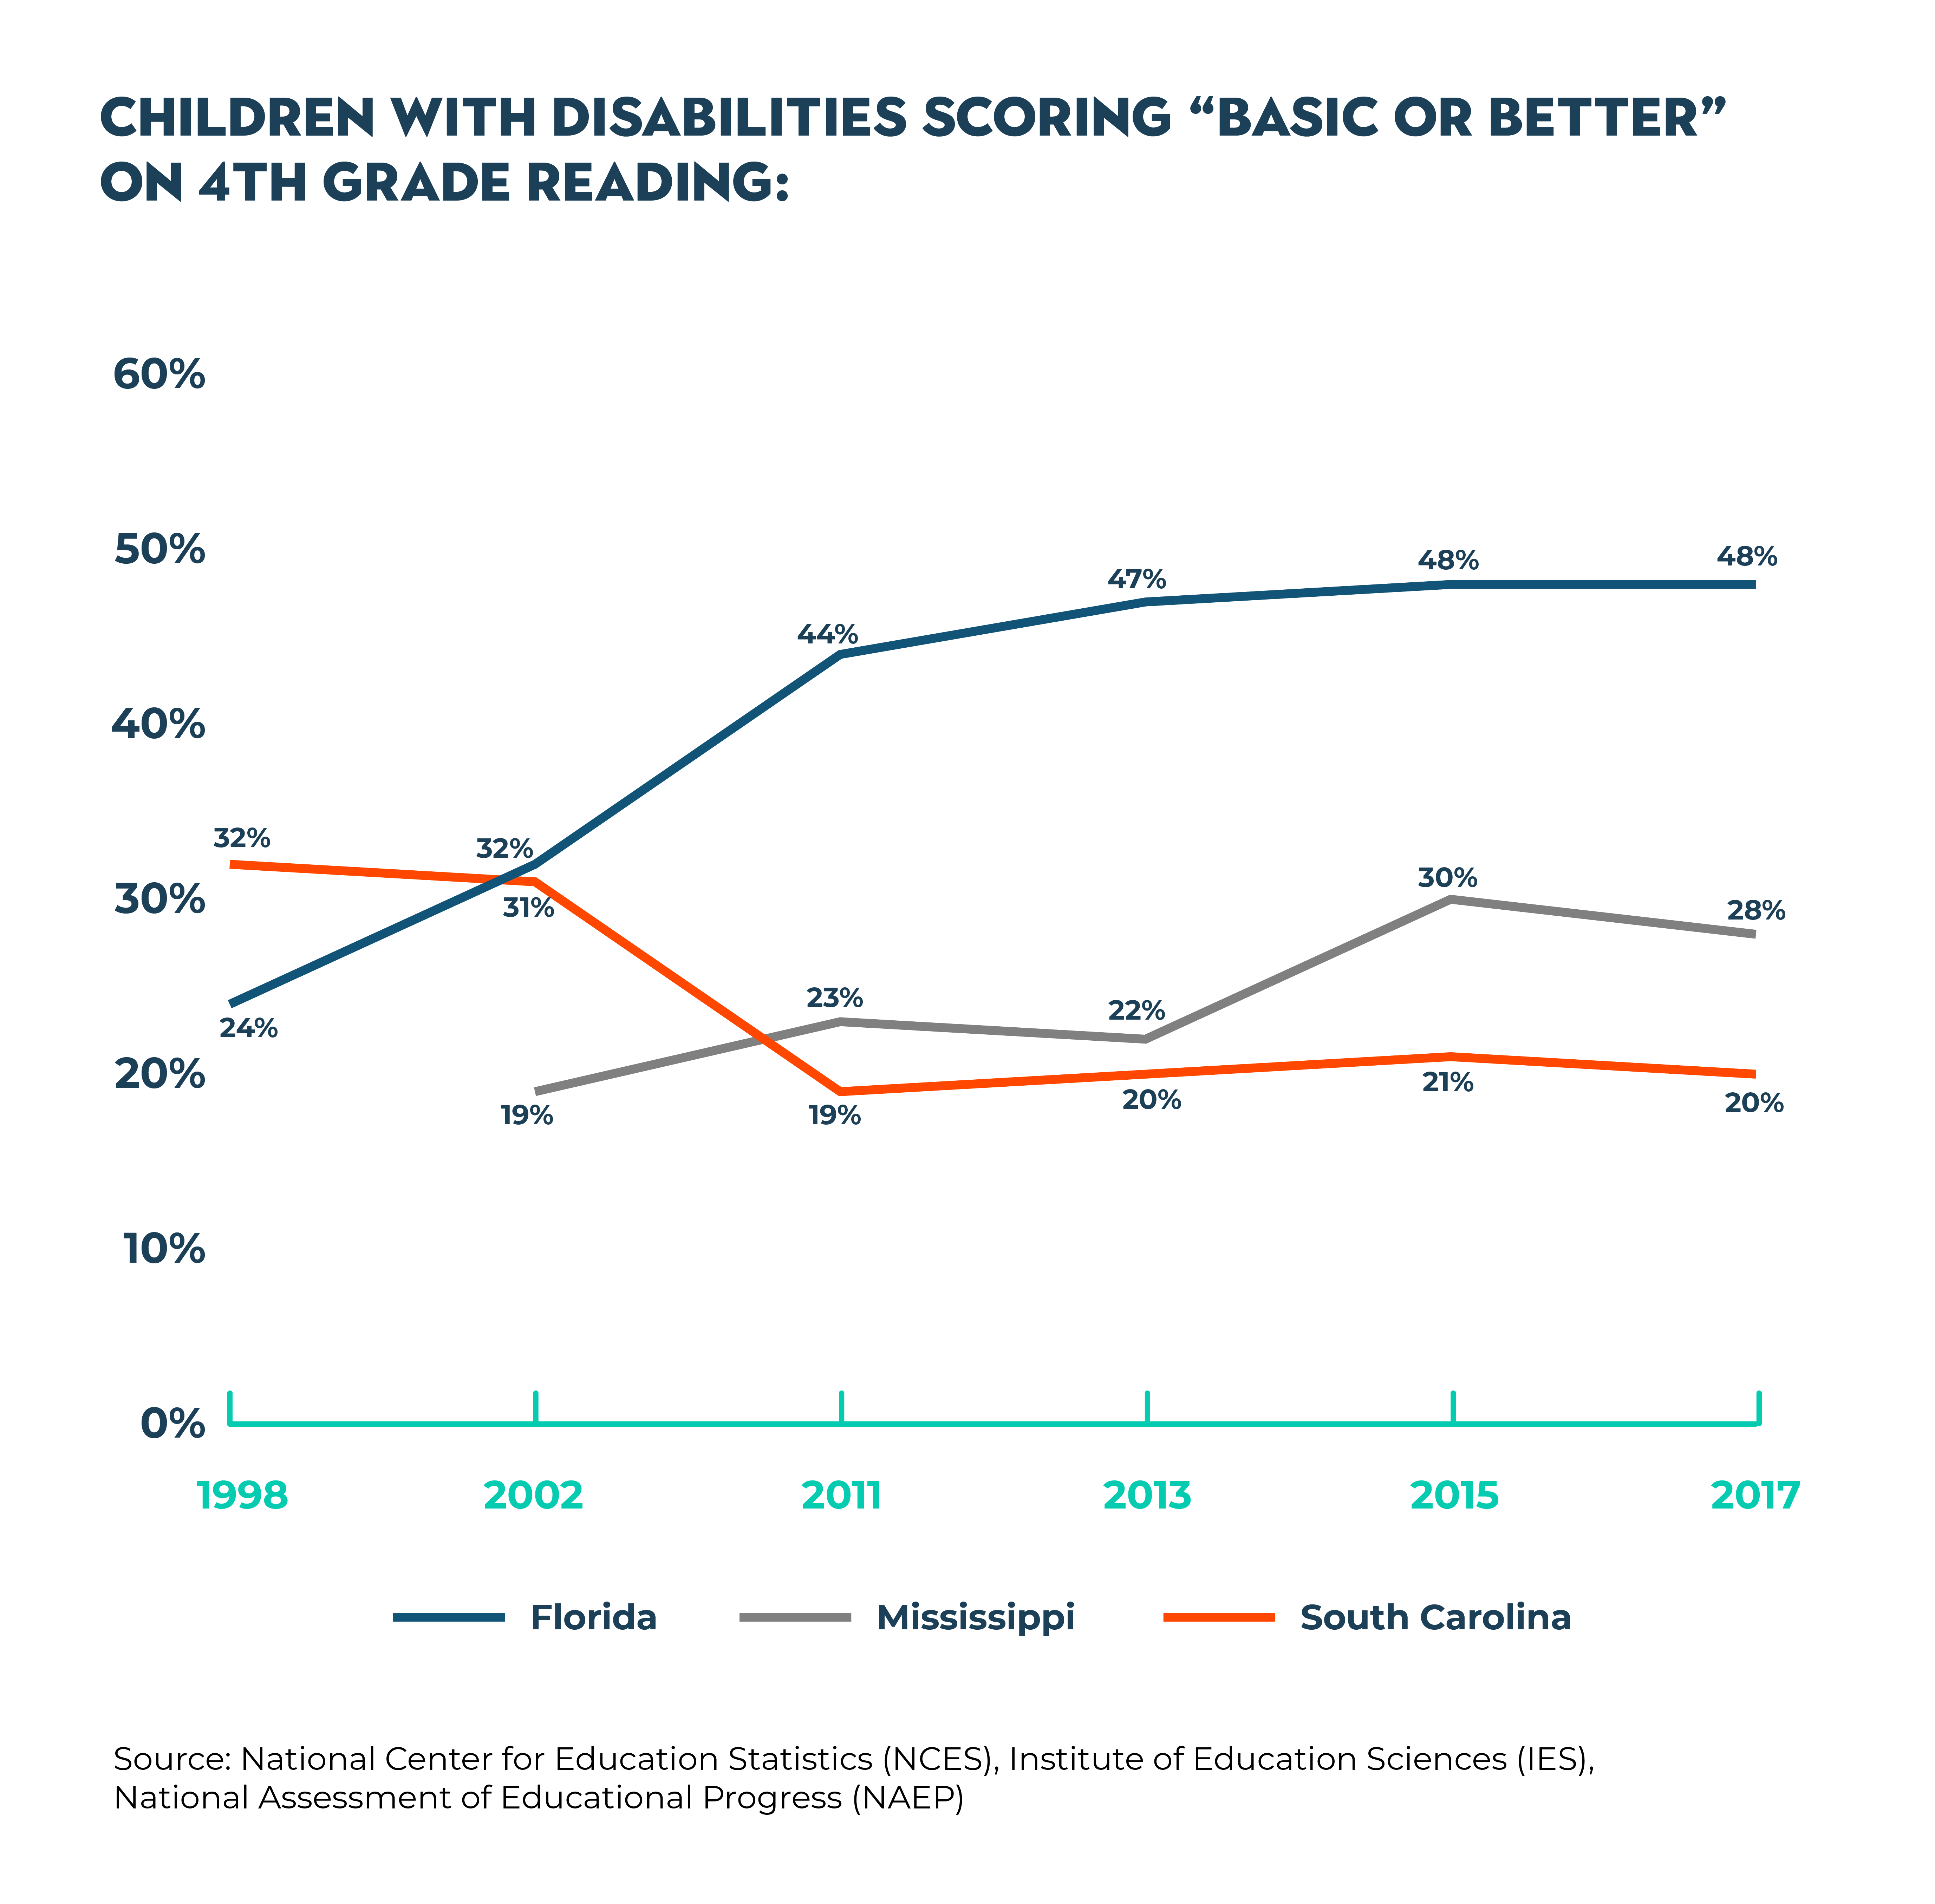 Children with disabilities scoring “basic or better” on 4th grade reading